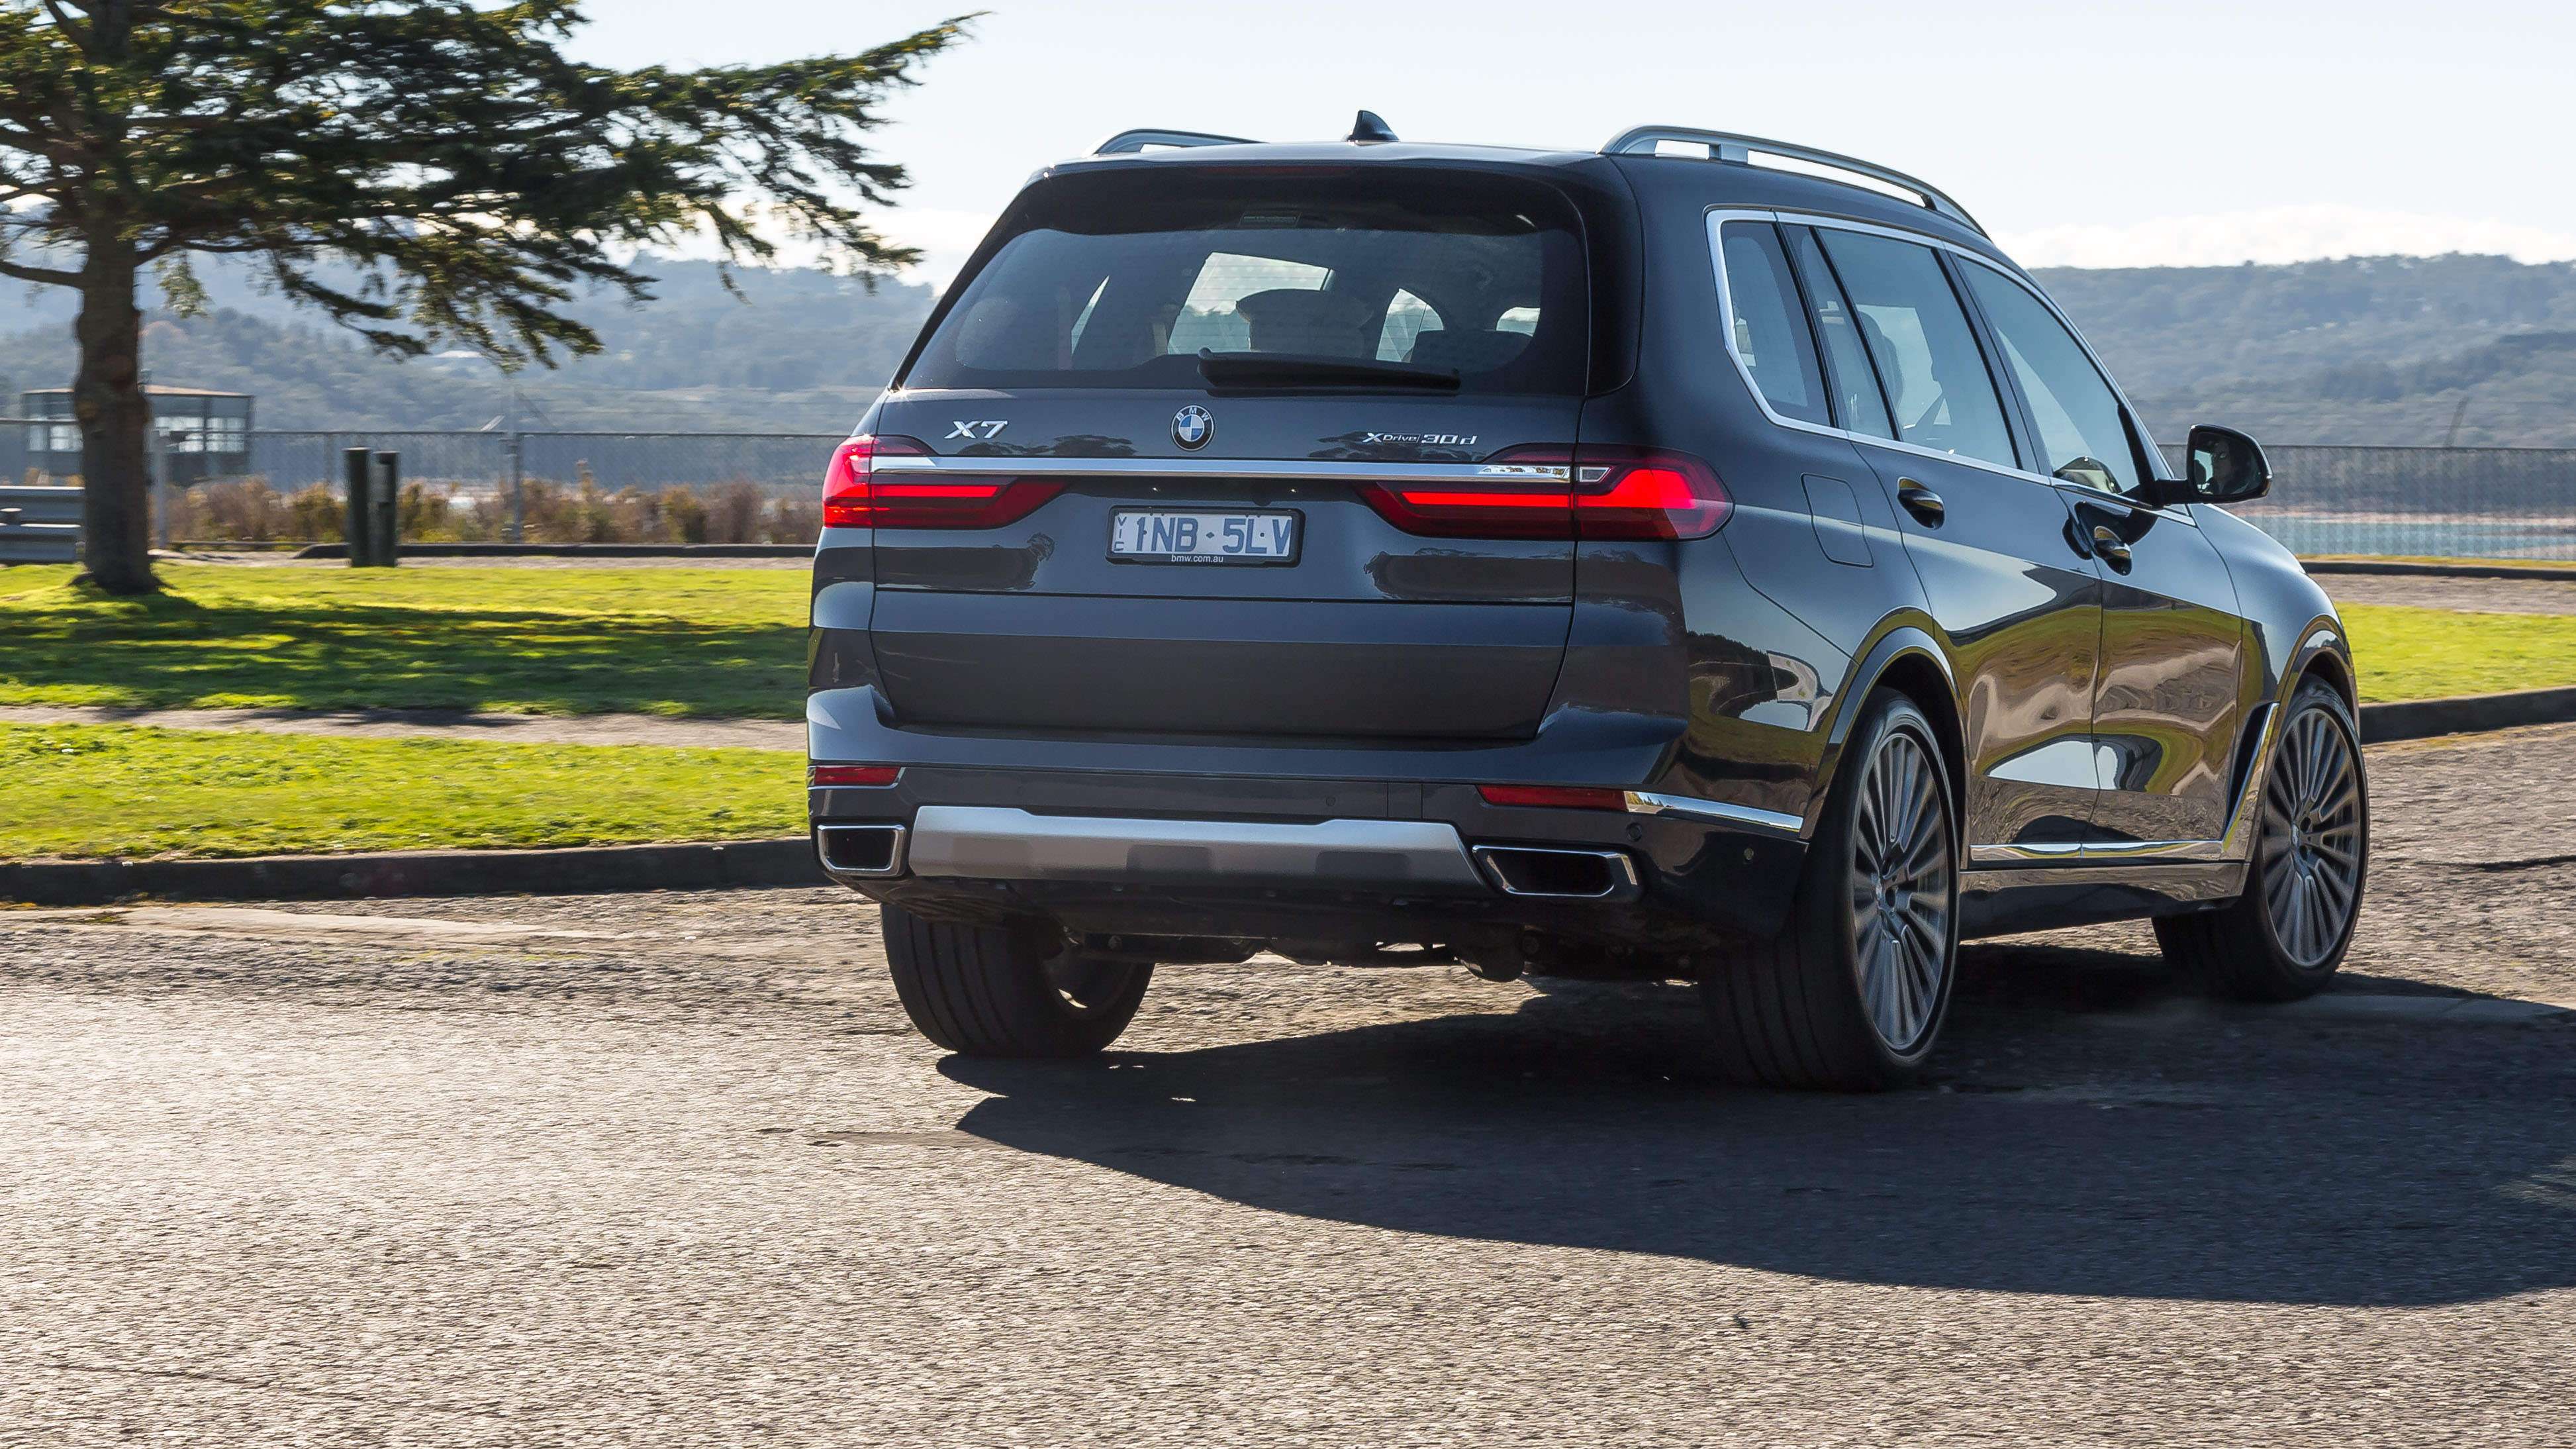 2019 Bmw X7 Xdrive30d Review Caradvice